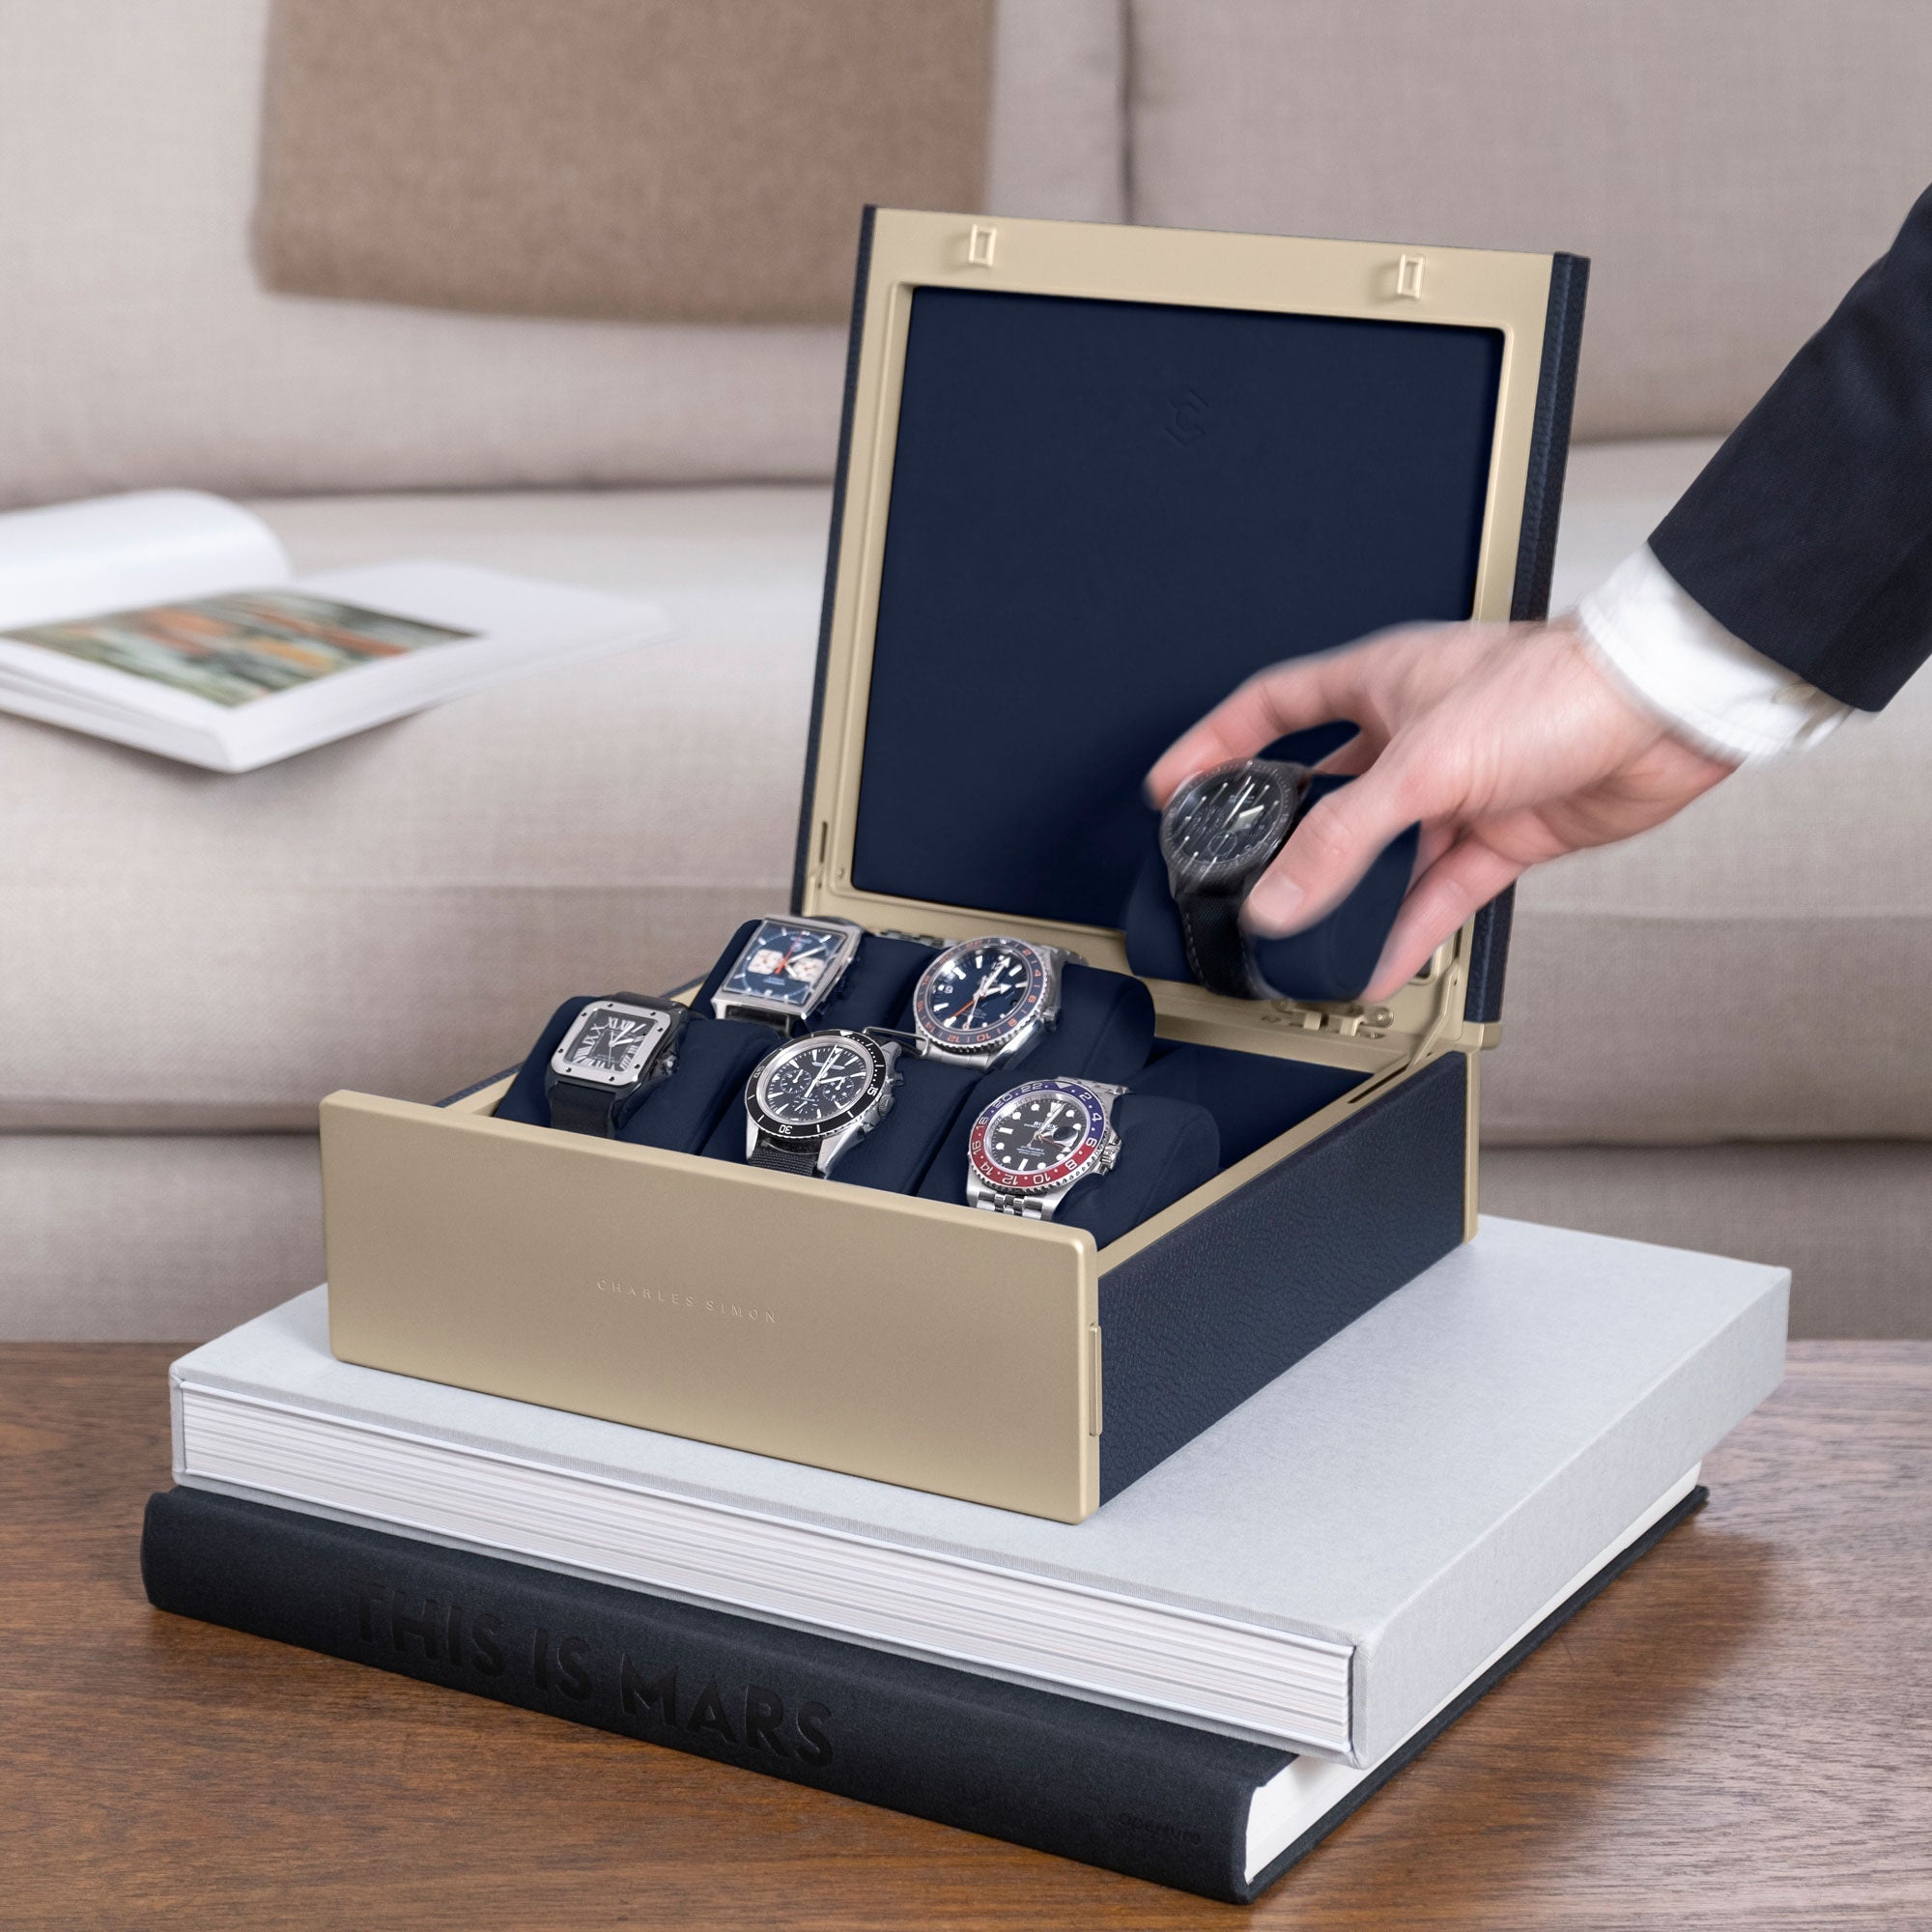 Lifestyle photo of man taking luxury watch from his gold Spence watch box in marine leather, holding his watch collection of 6 watches